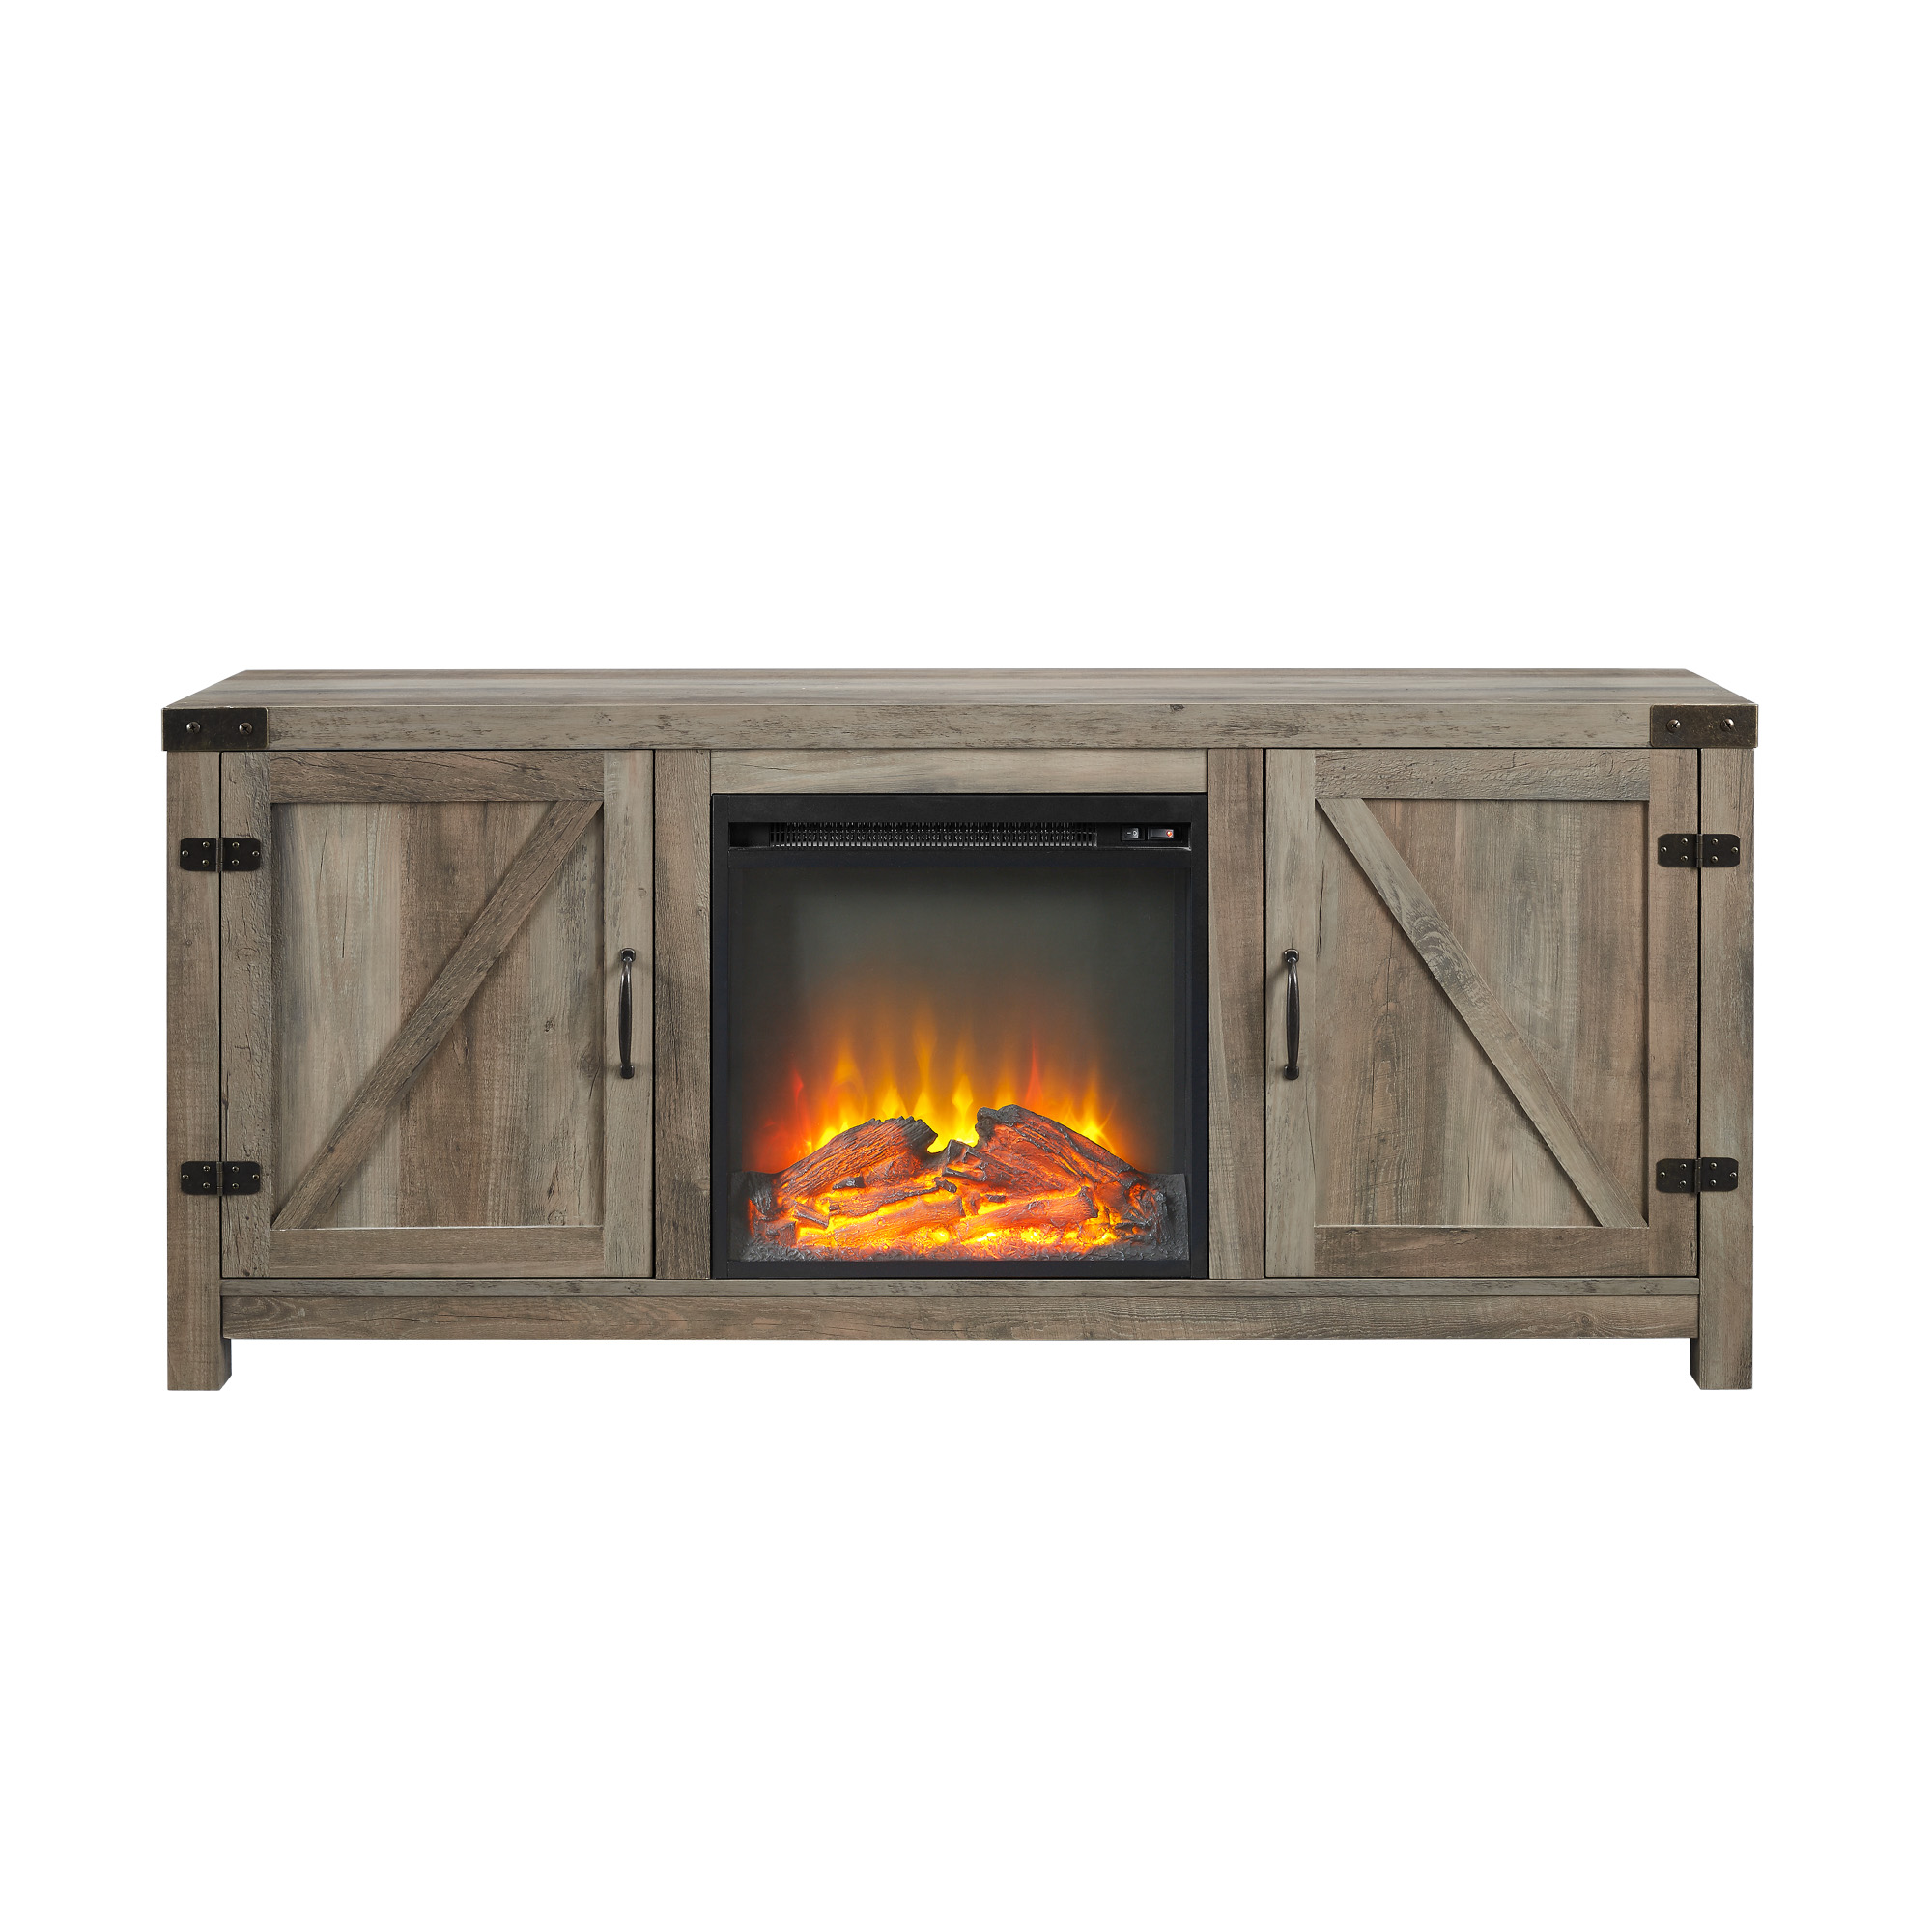 Walker Edison Modern Farmhouse Fireplace TV Stand for TVs up to 65", Grey Wash - image 5 of 11